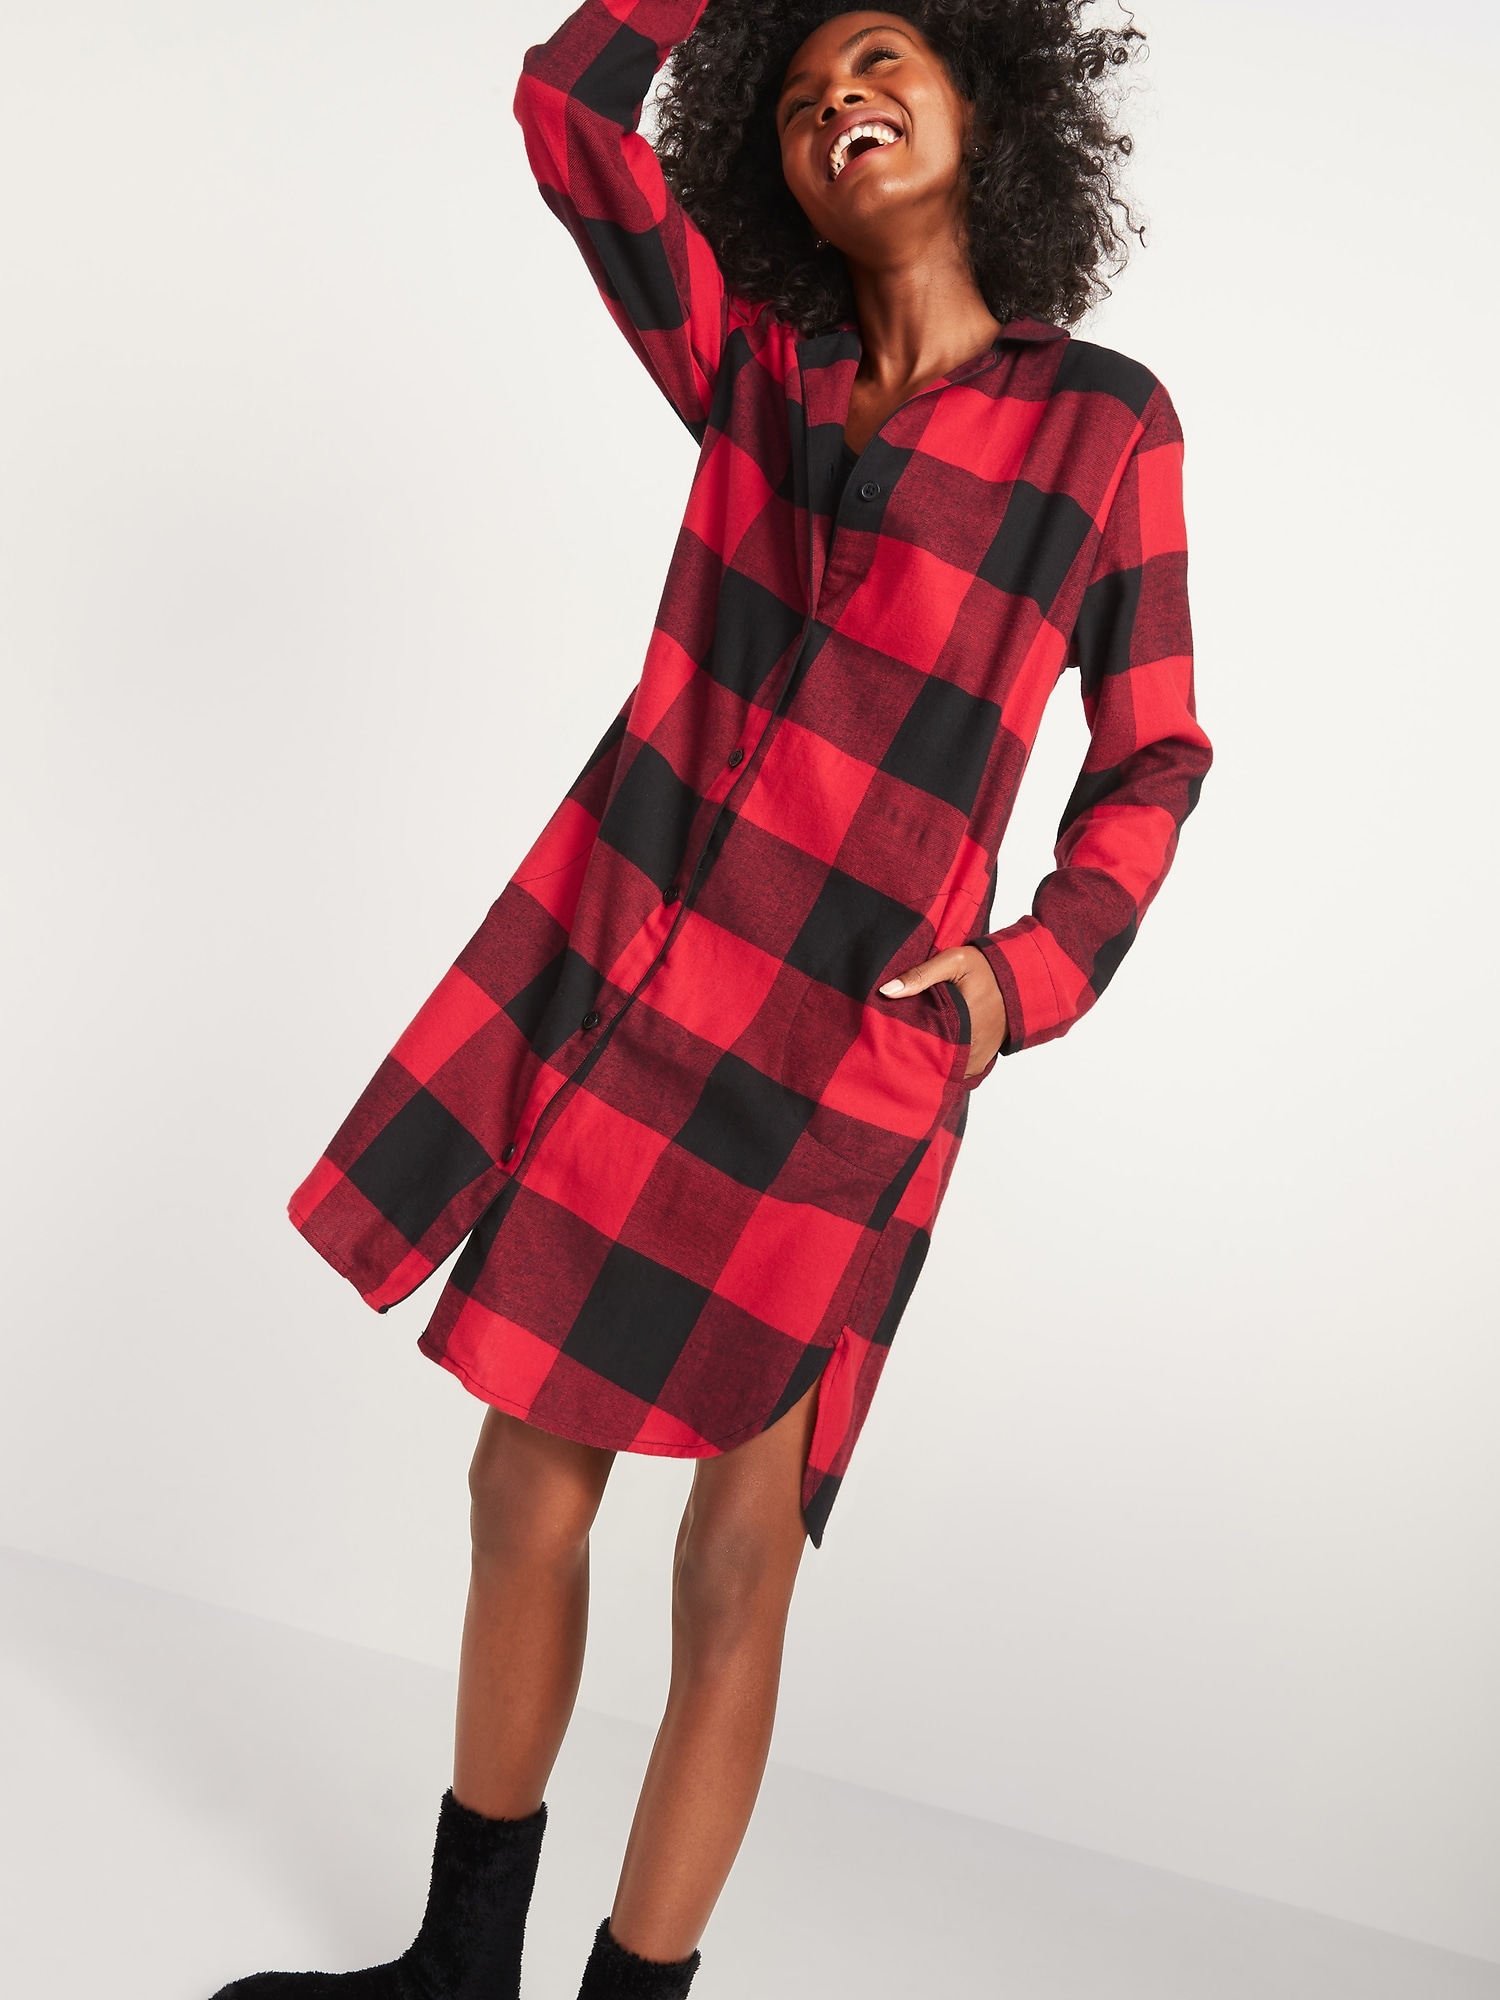 Womens Flannel Nightgown 100% Cotton Flannel Red Plaid Sleep Dress